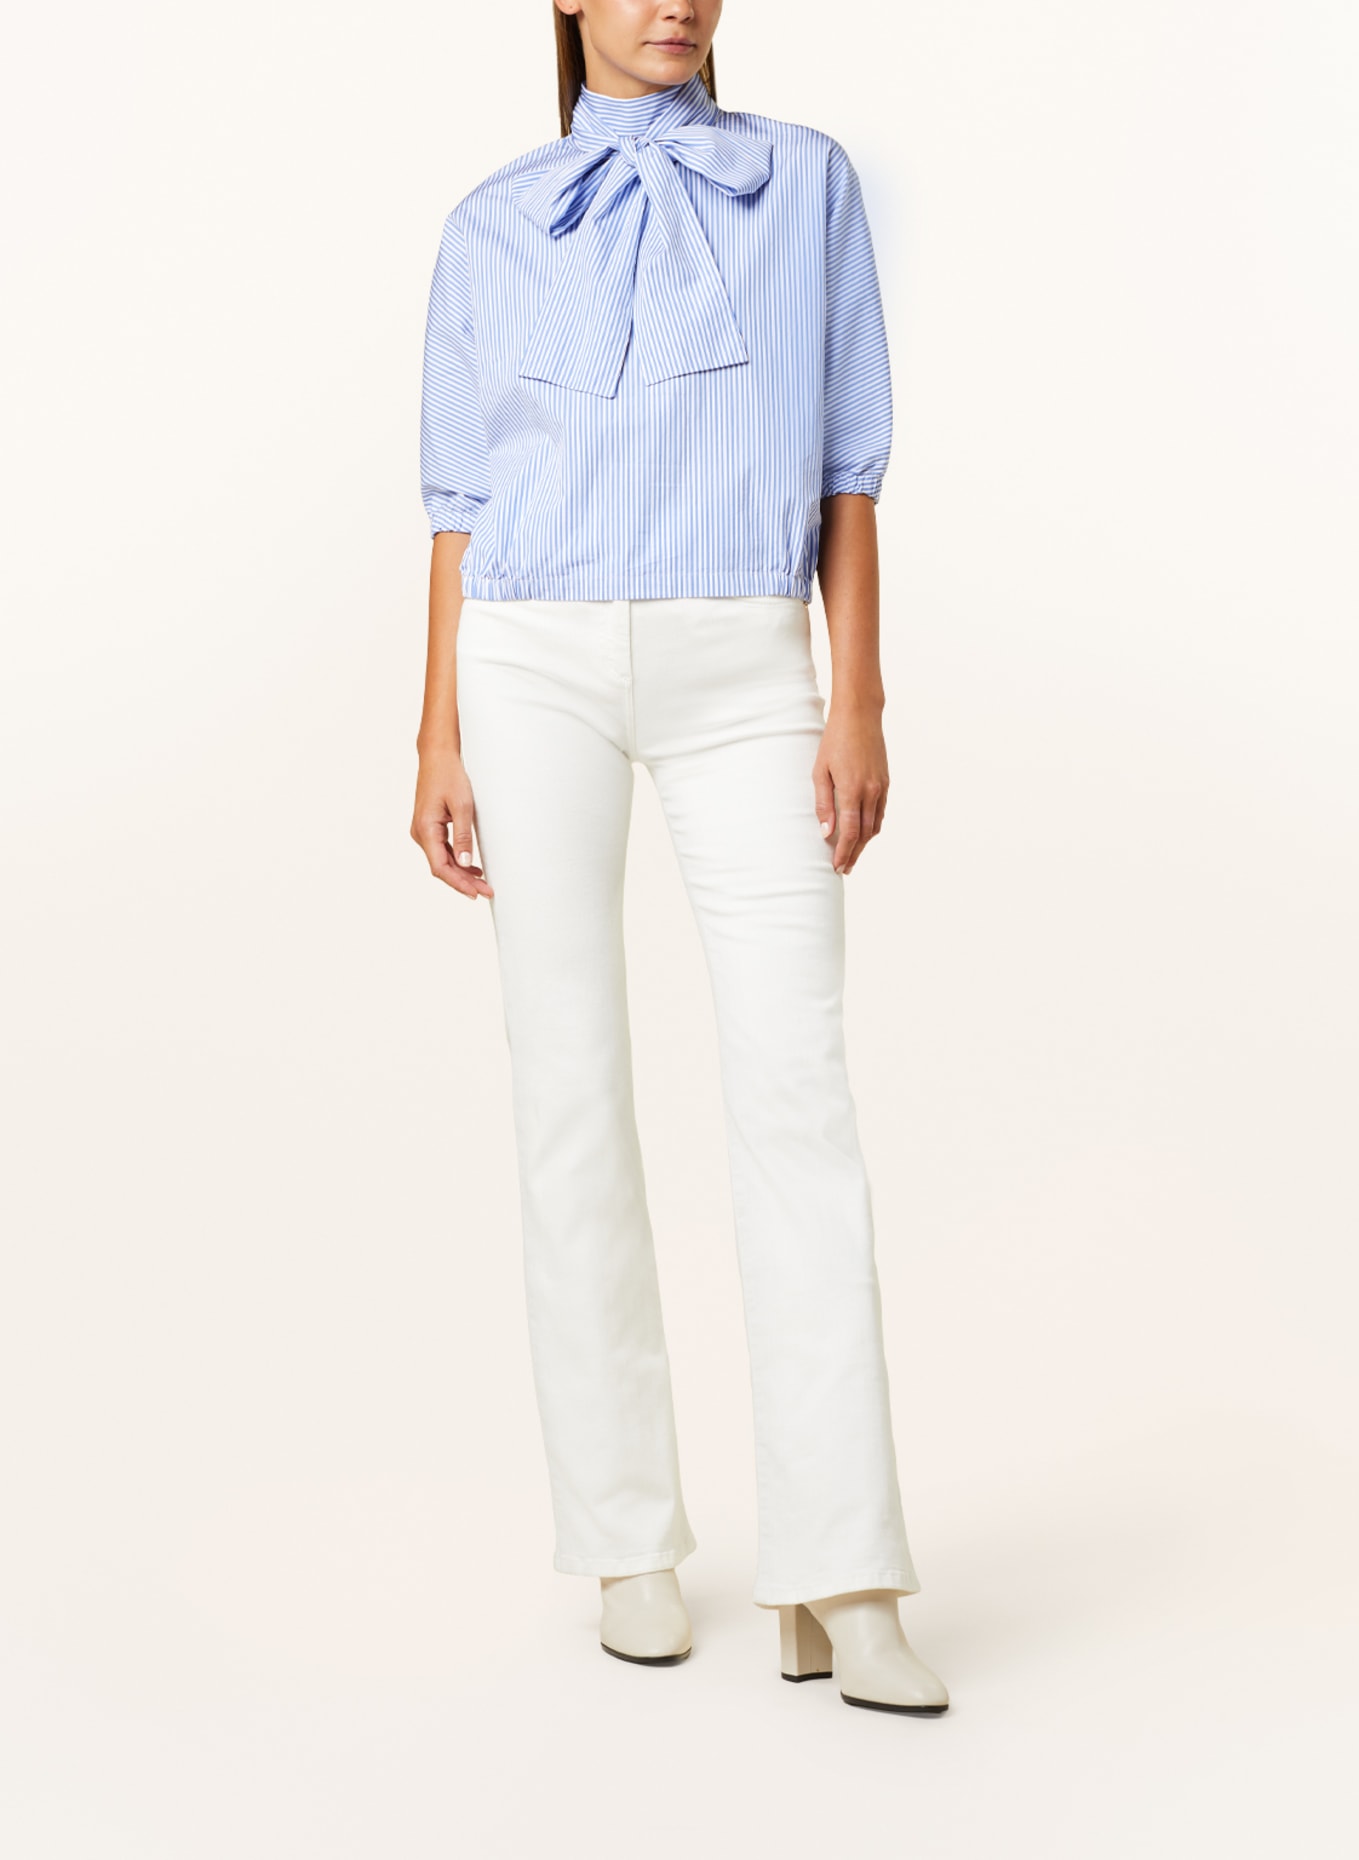 TONNO & PANNA Bow-tie blouse with 3/4 sleeves, Color: BLUE/ WHITE (Image 2)